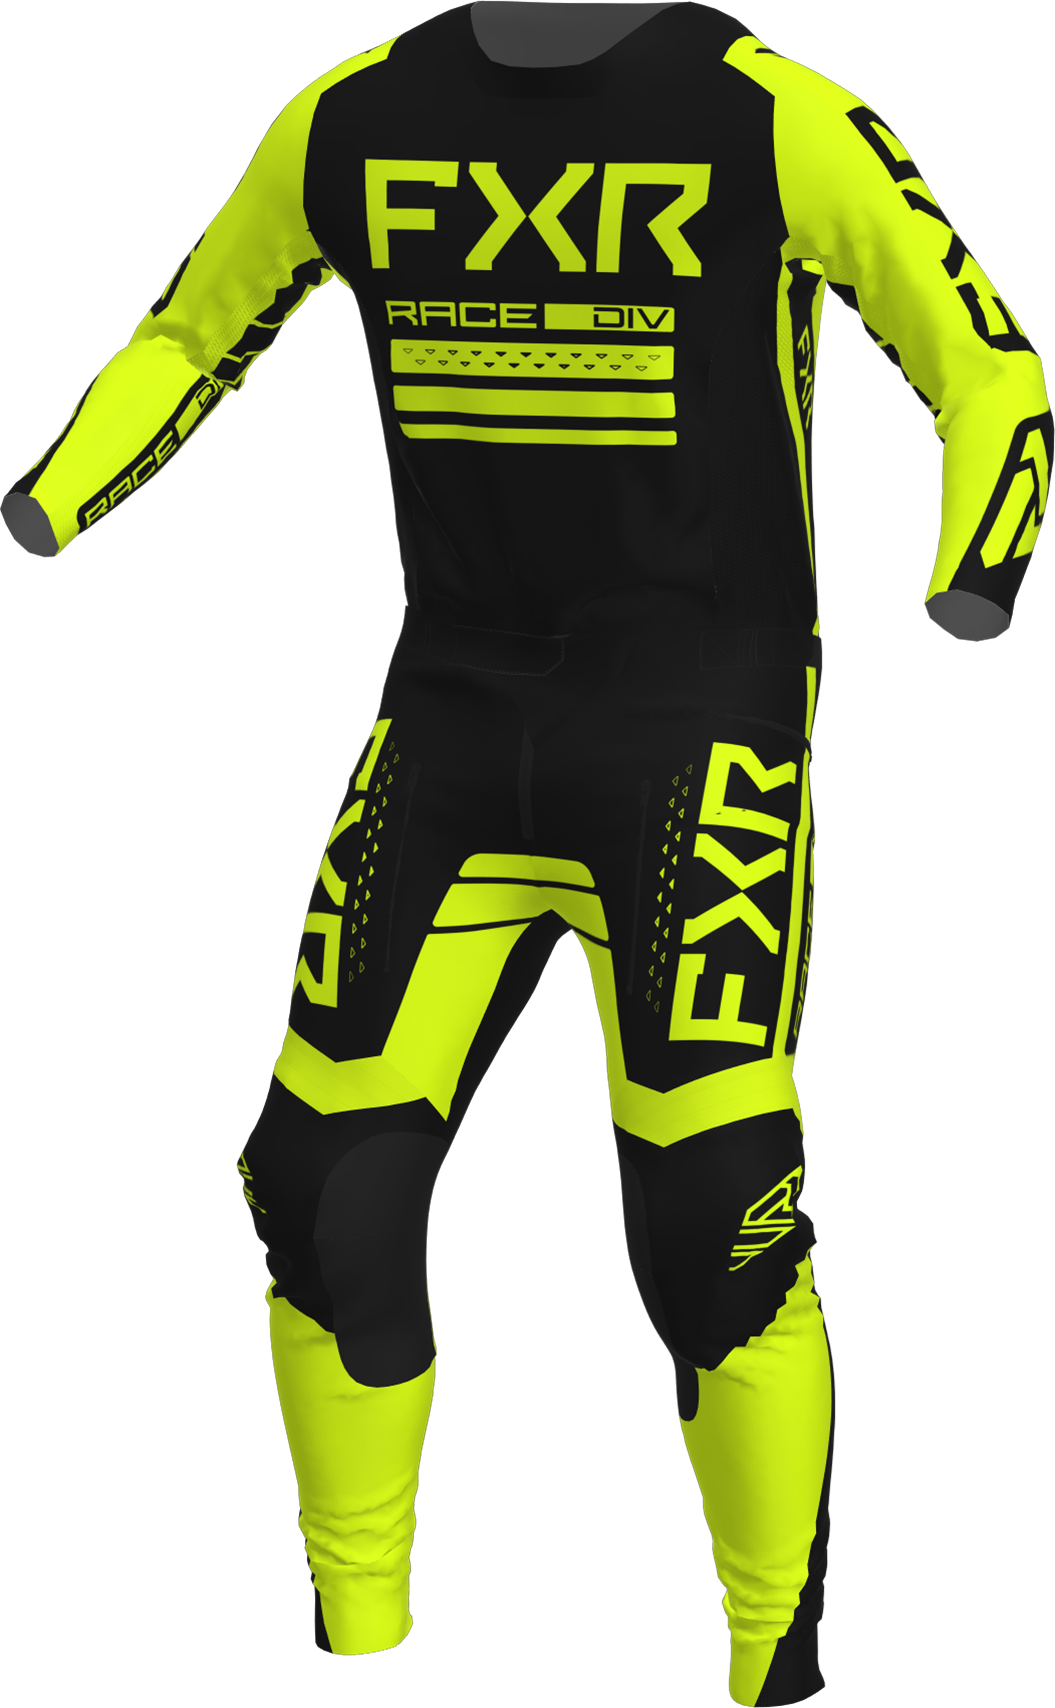 A 3D image of FXR's Contender MX Jersey and Pant in Black/Hi-Vis colorway